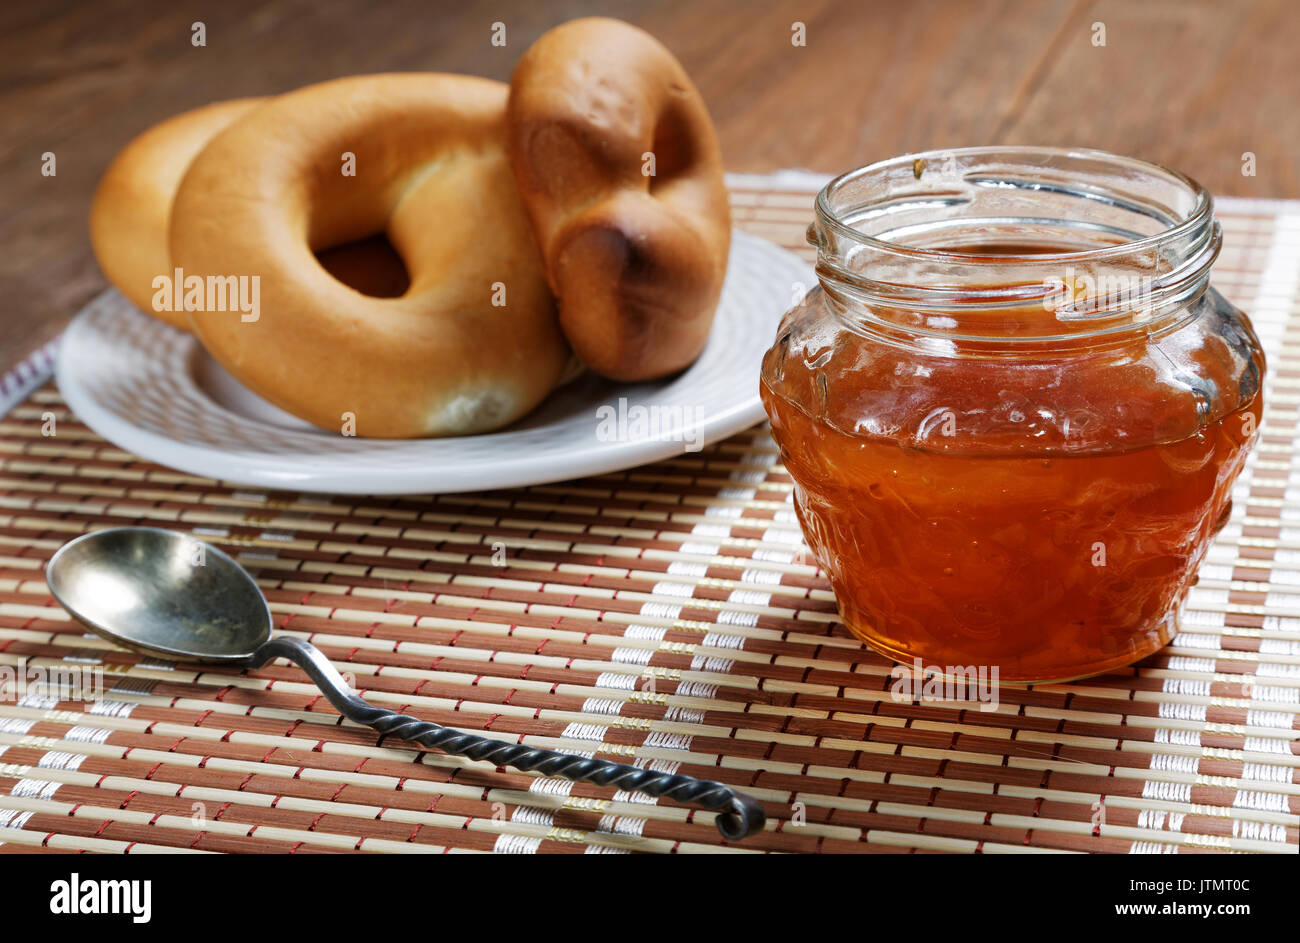 Jam jar and pretzel on the table close-up Stock Photo